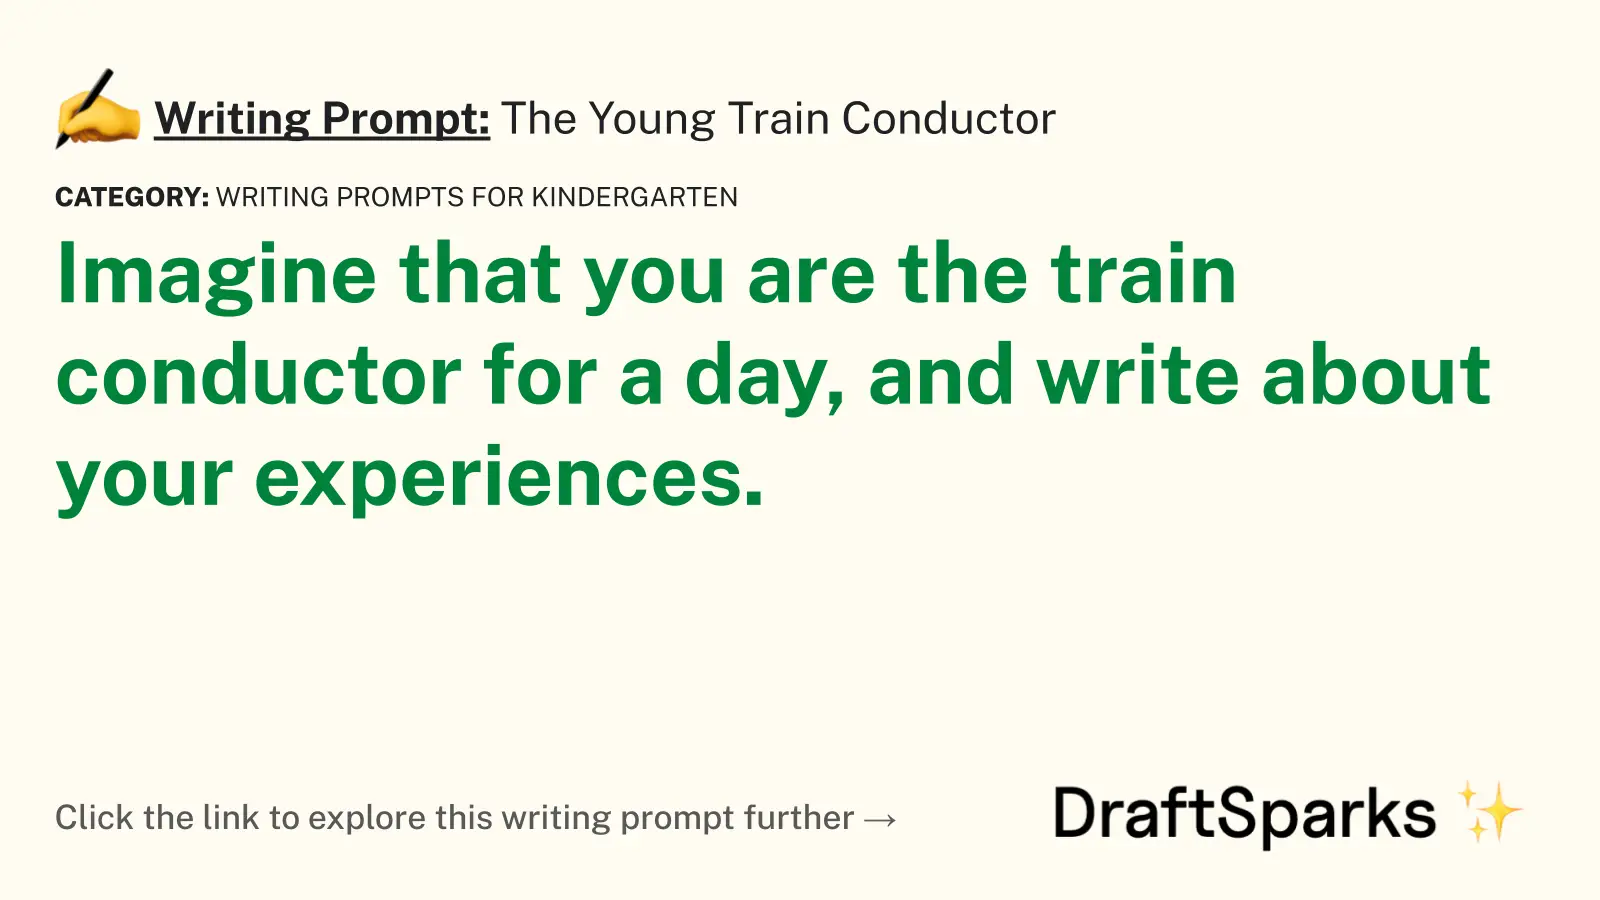 The Young Train Conductor